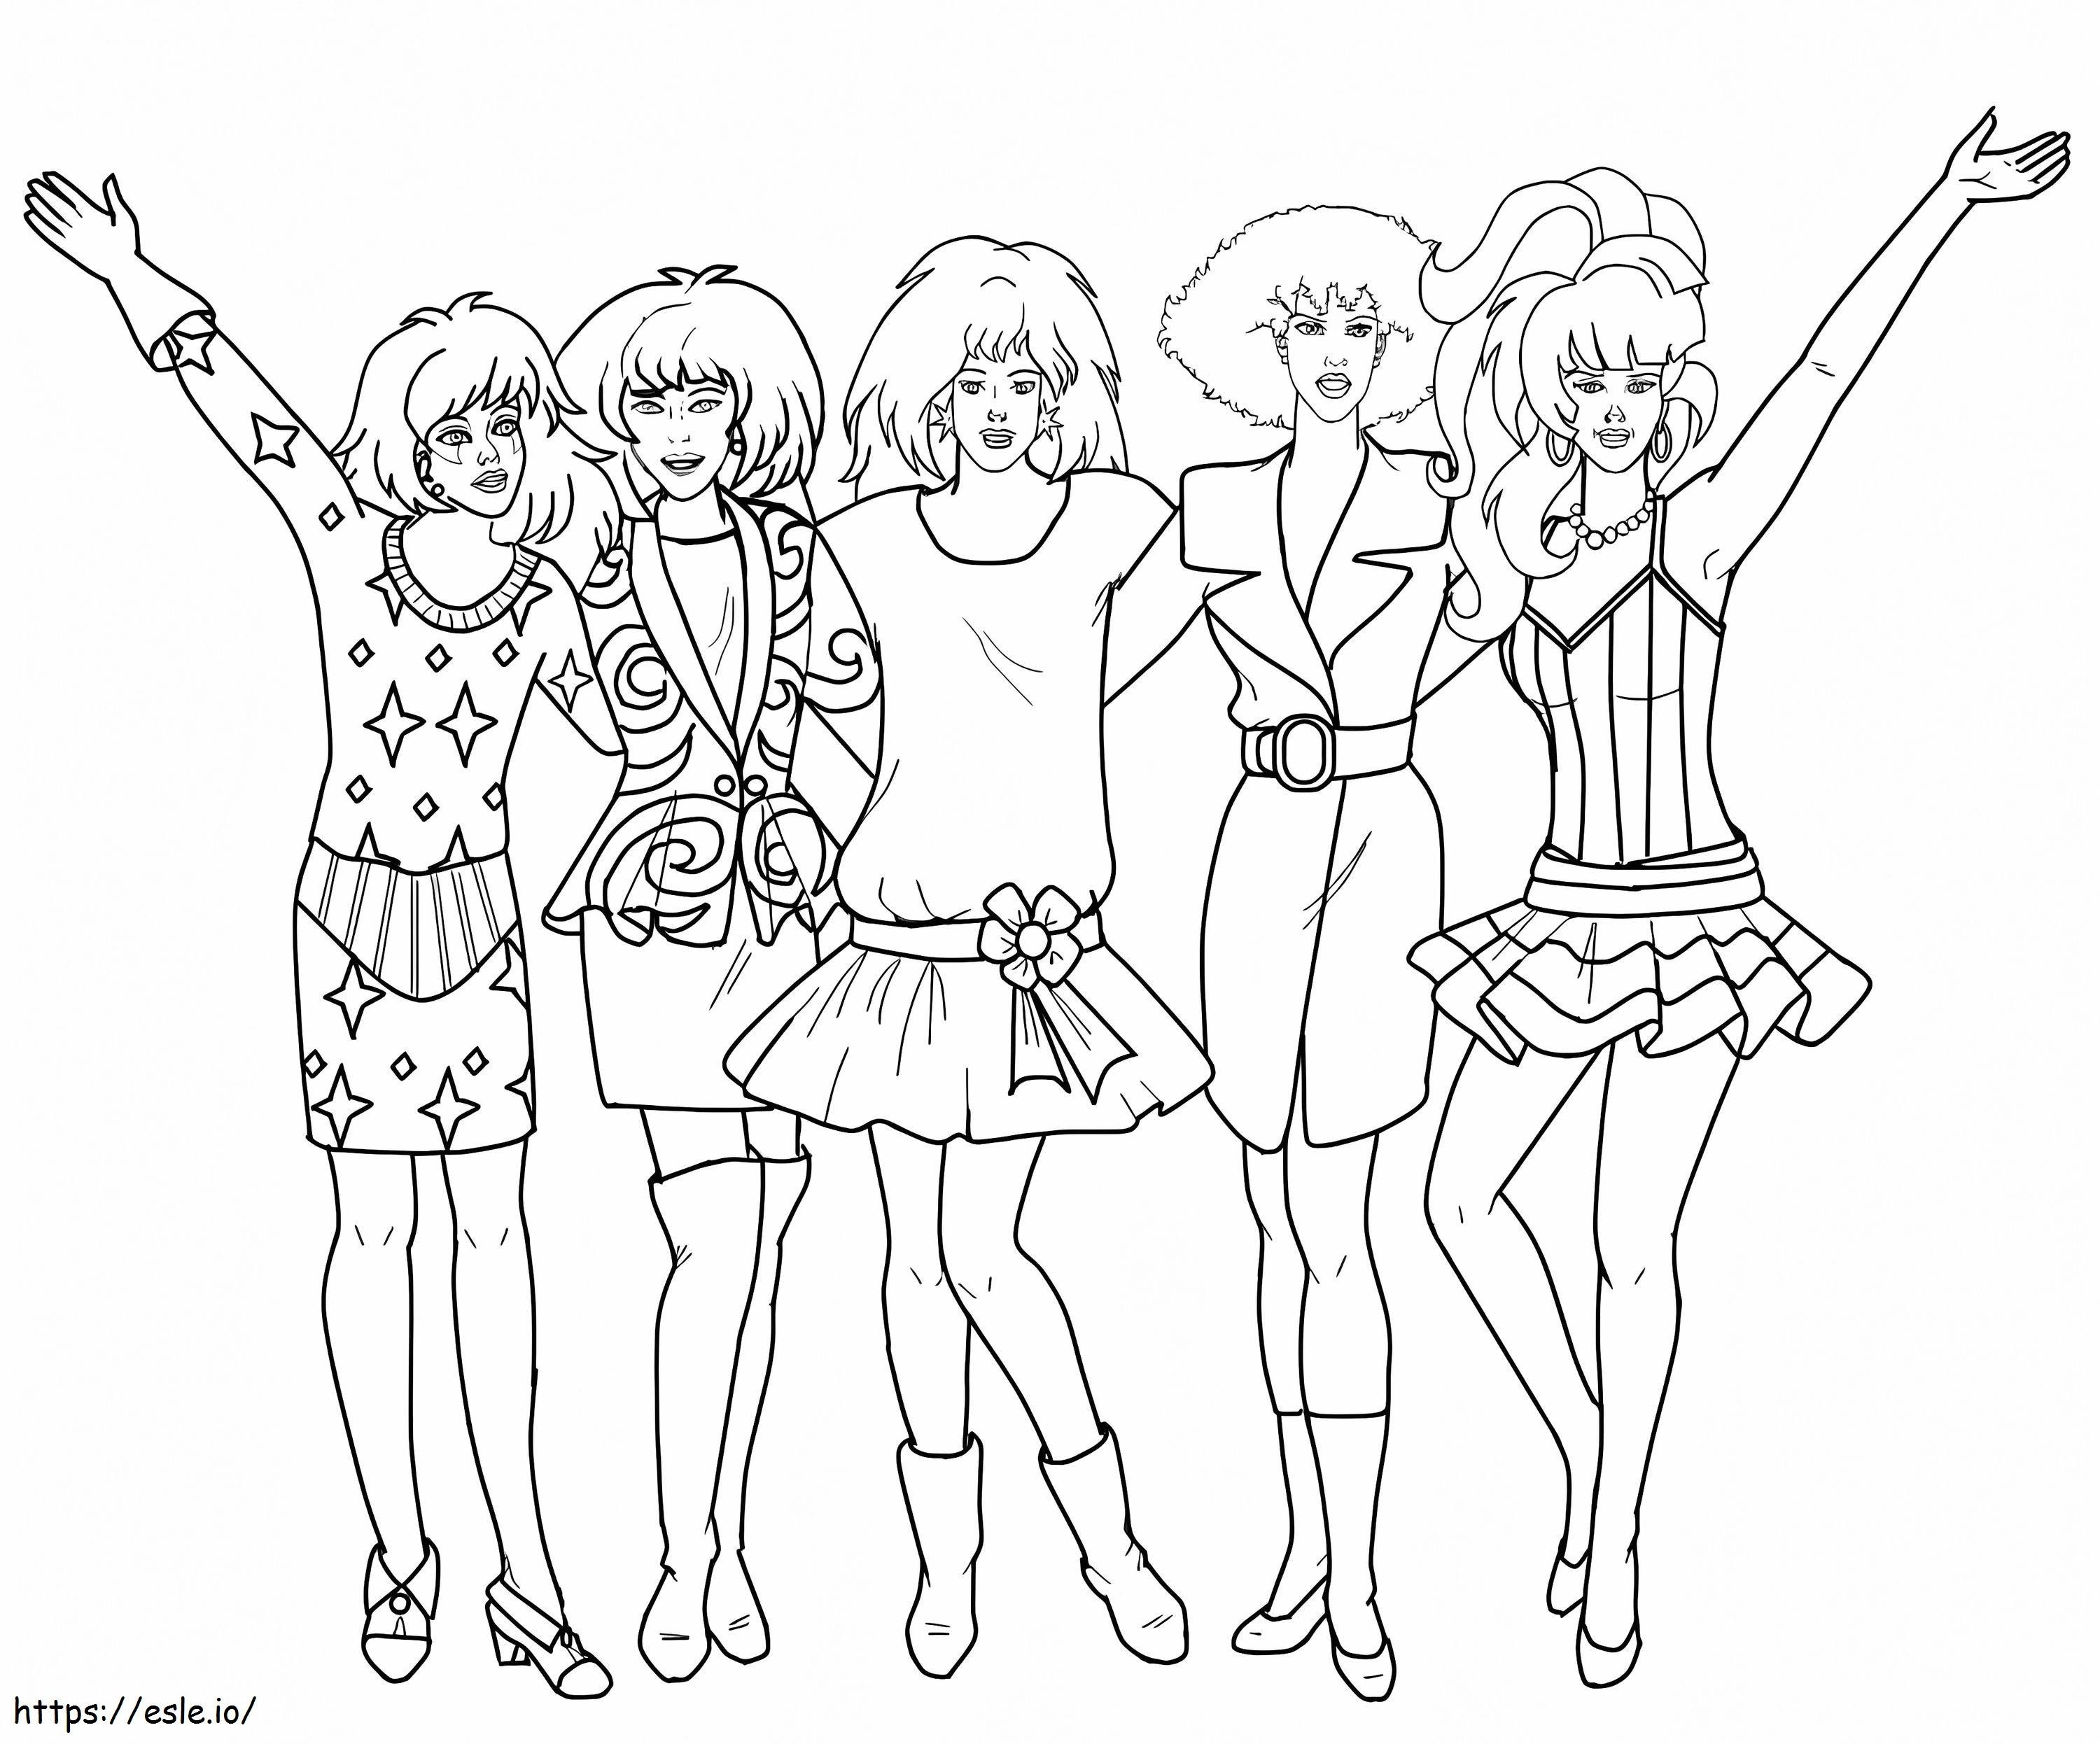 Free Jem And The Holograms coloring page